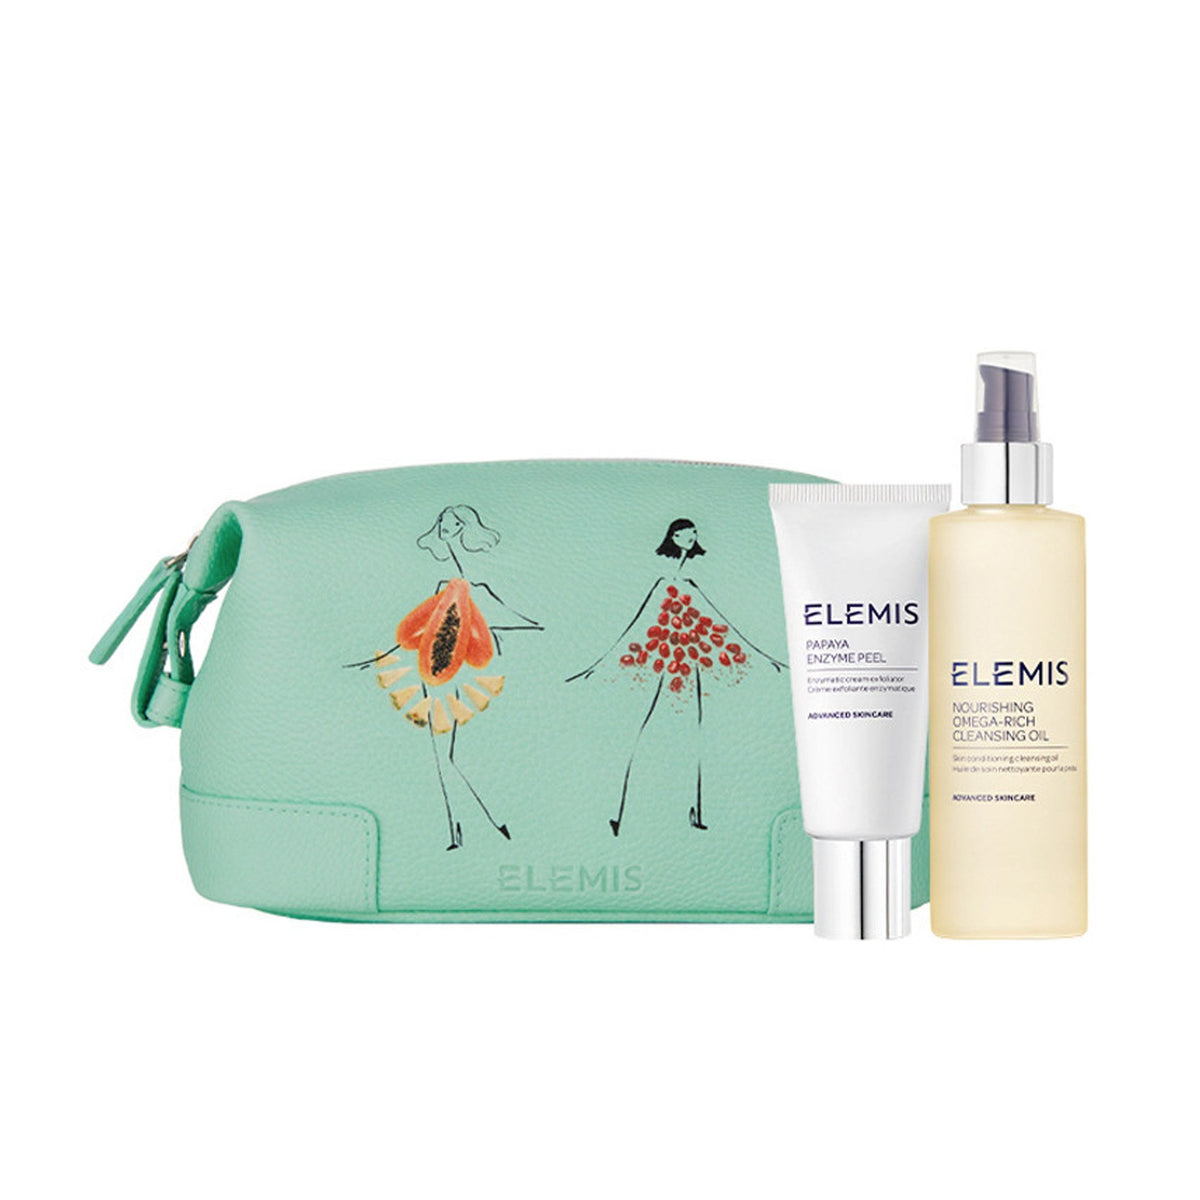 Elemis The Glow-Getters Duo kit